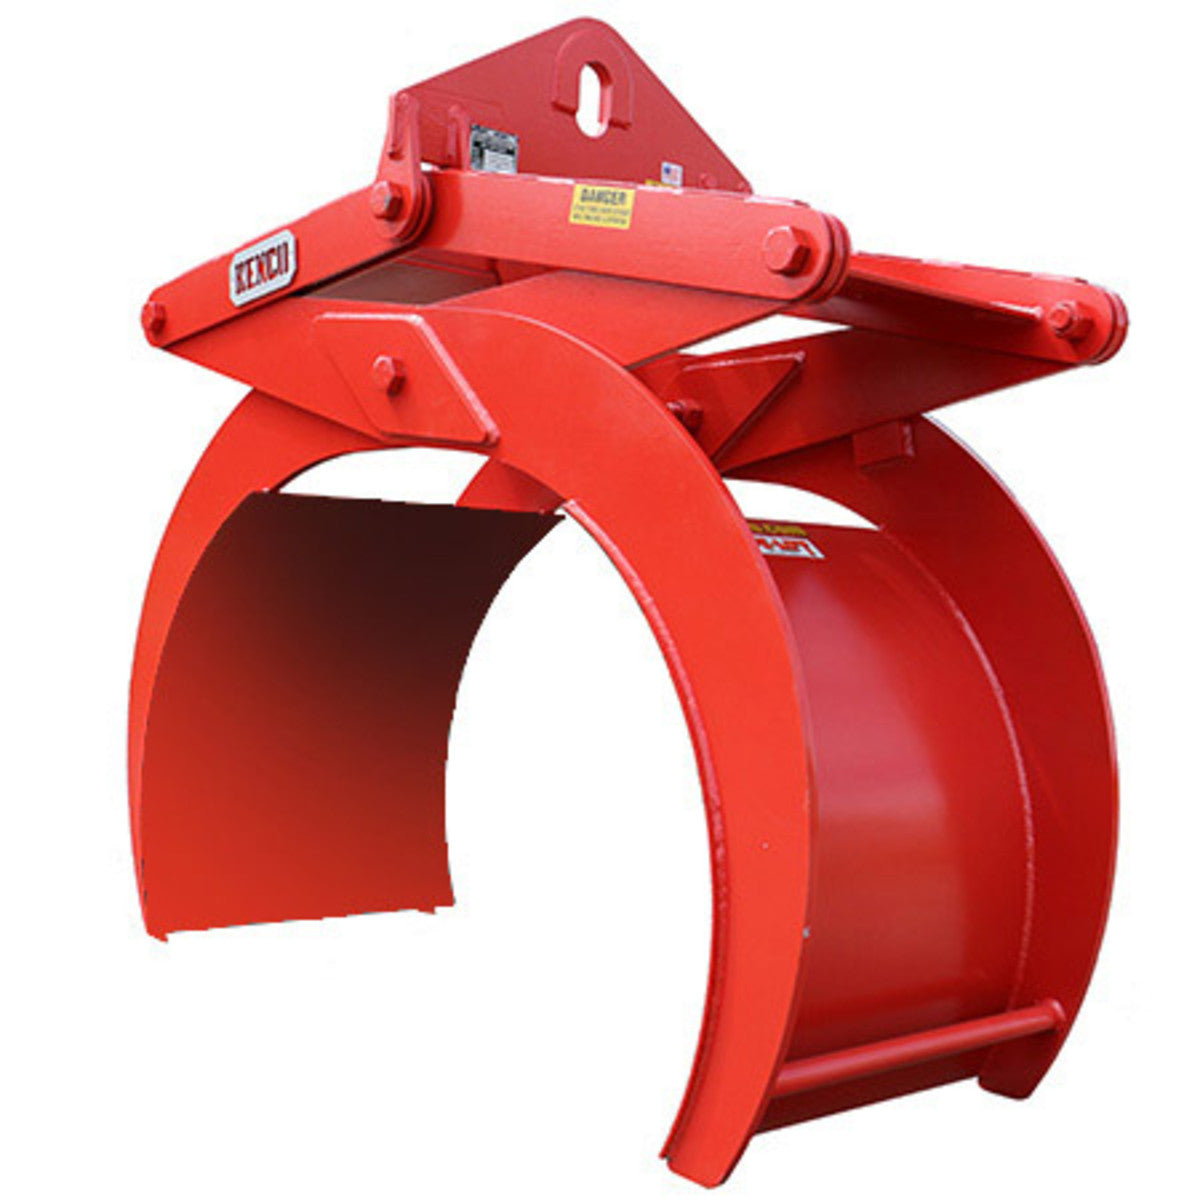 KENCO PIPE LIFTS | UPTO 8500 LBS